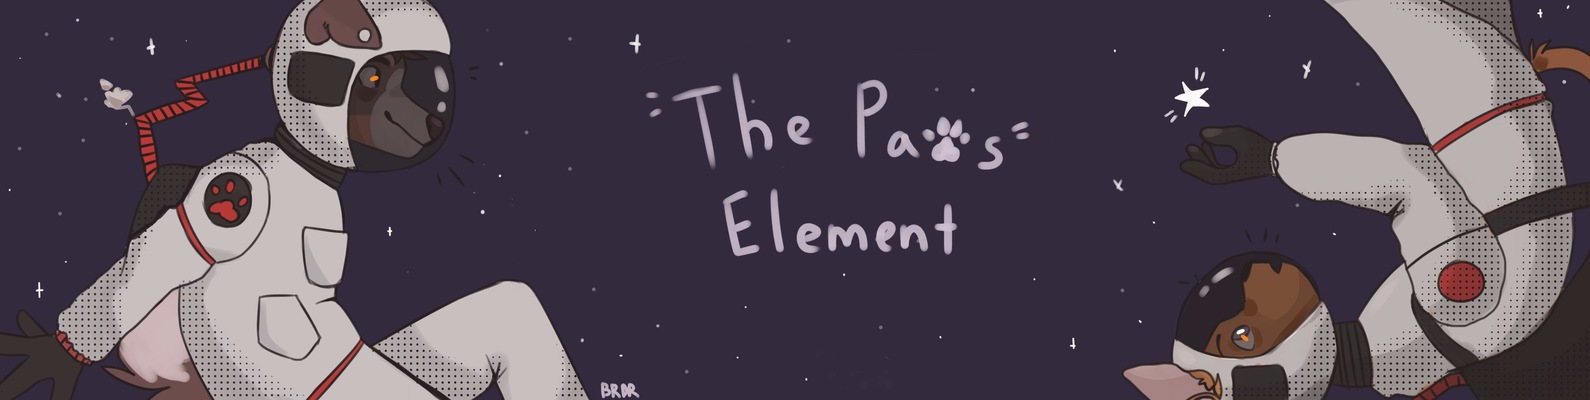 The paws element. Мы фурри! The Paws element. The Paws element концерт. The Paws element мерч.